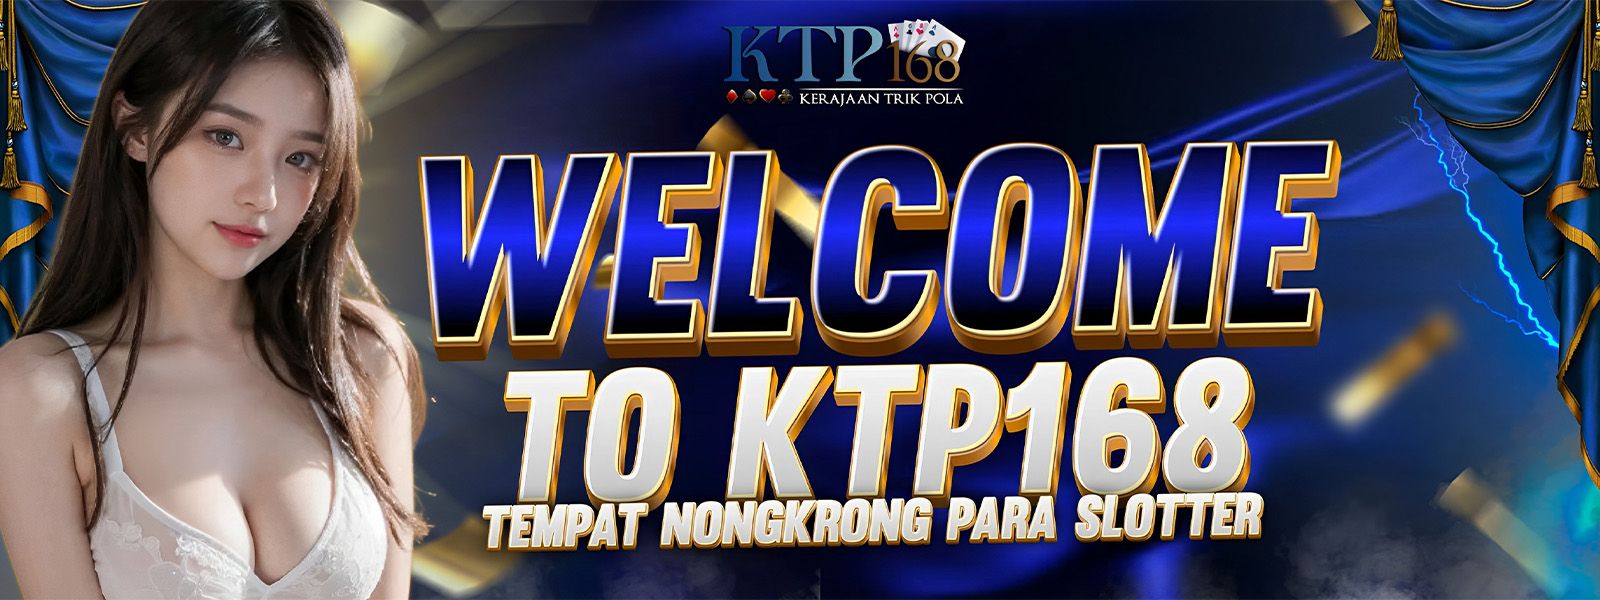 welcome to KTP1668